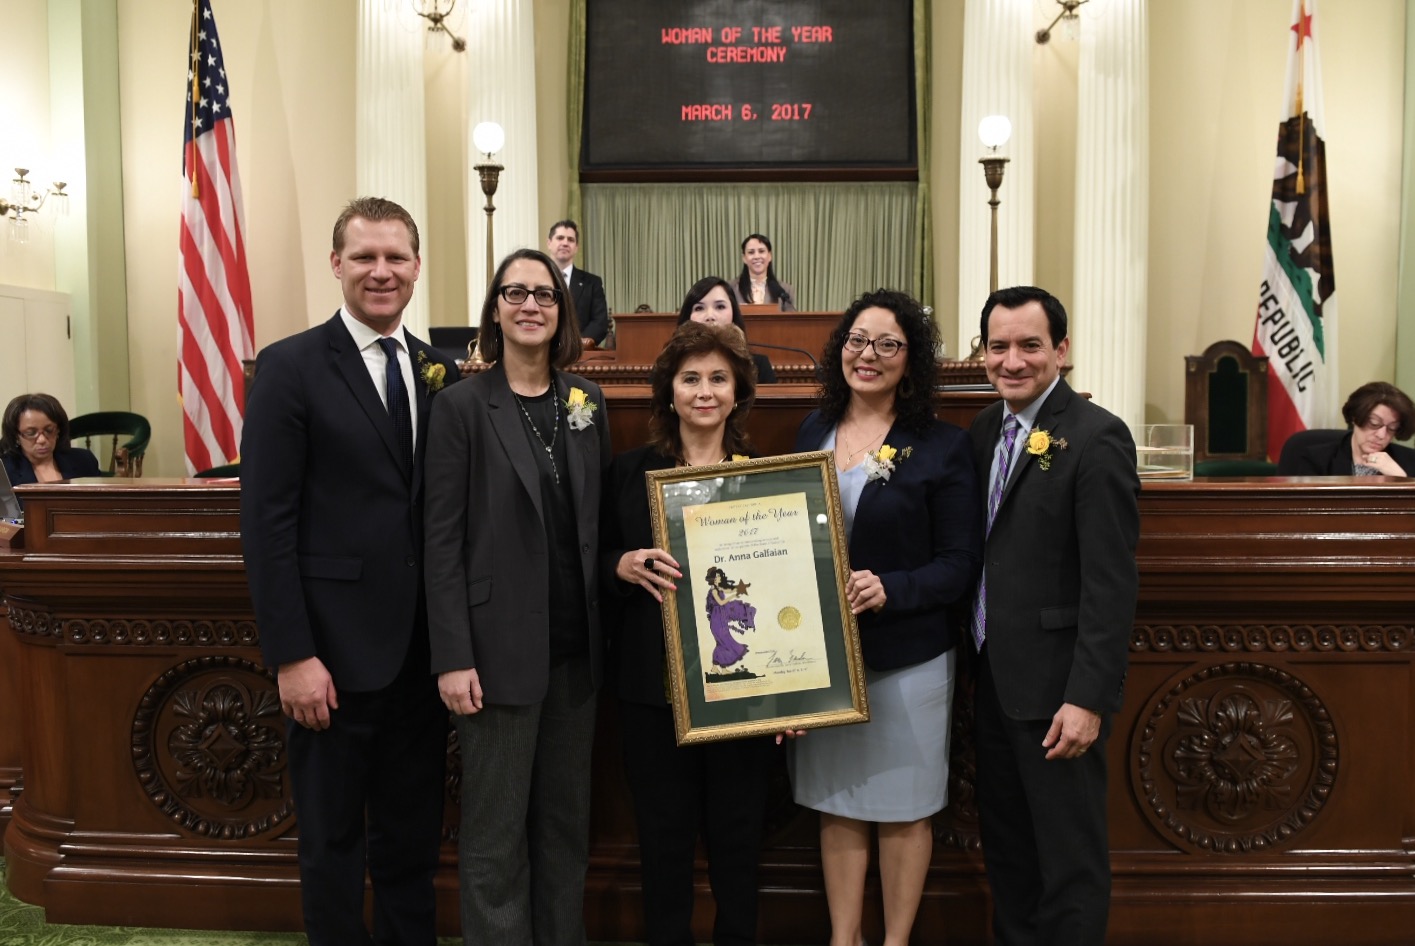 Republican Leader Chad Mayes, Assemblymember Laura Friedman, Dr. Anna Galfaian, Assemblymember Cristina Garcia, and Speaker Anthony Rendon